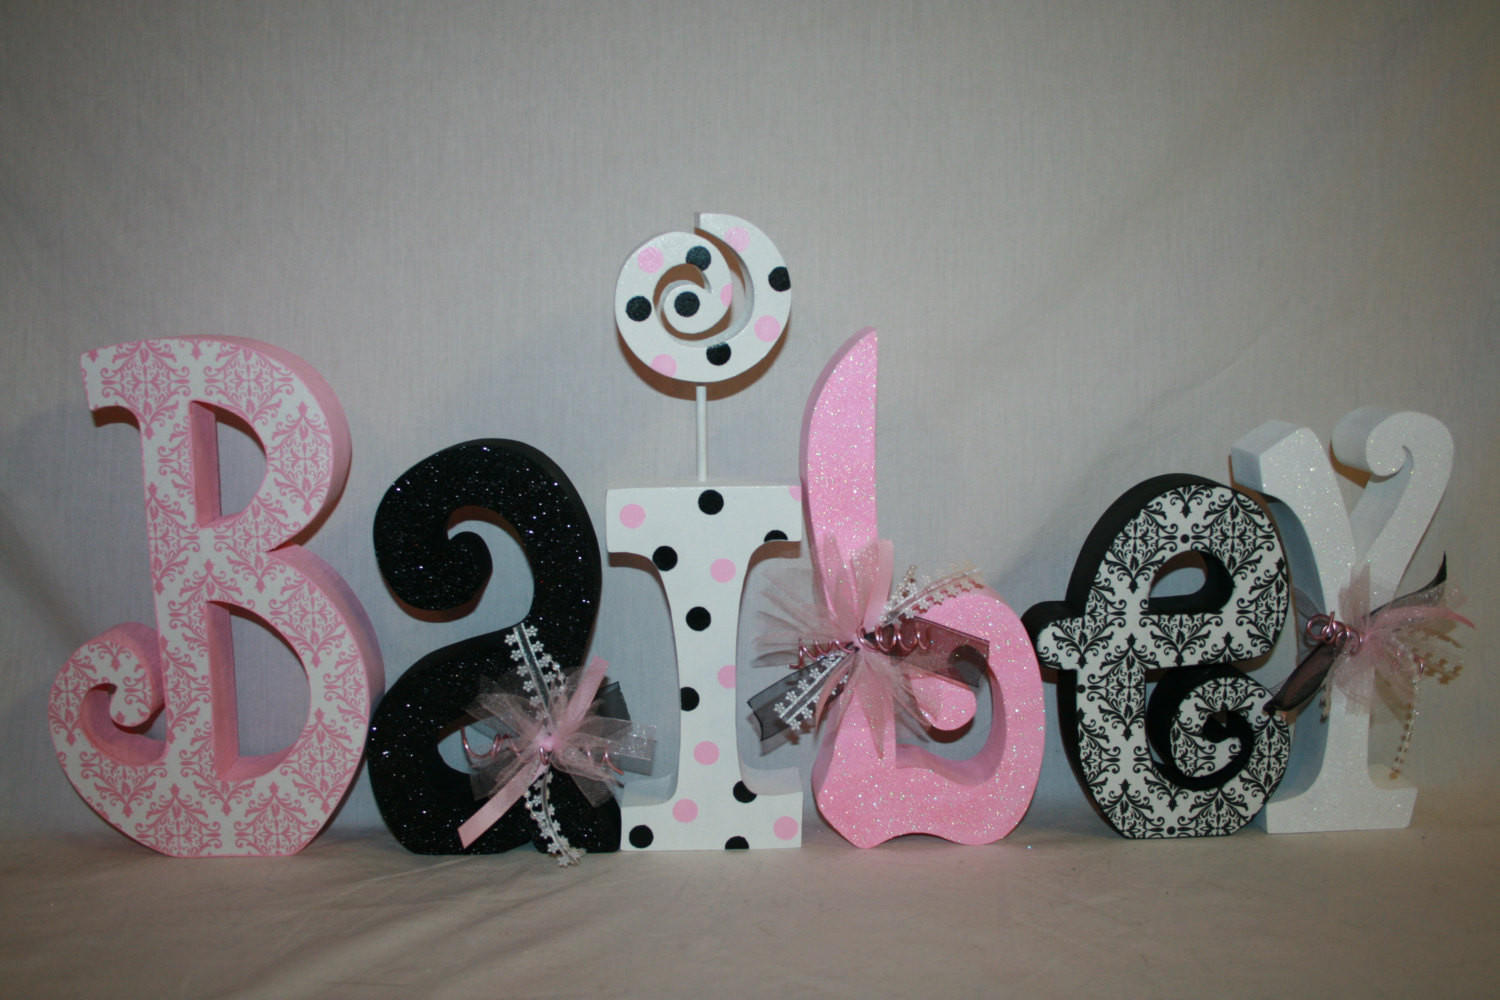 Baby Name Letters Room Decor
 Baby girl nursery decor 6 letter set Pink and black decor